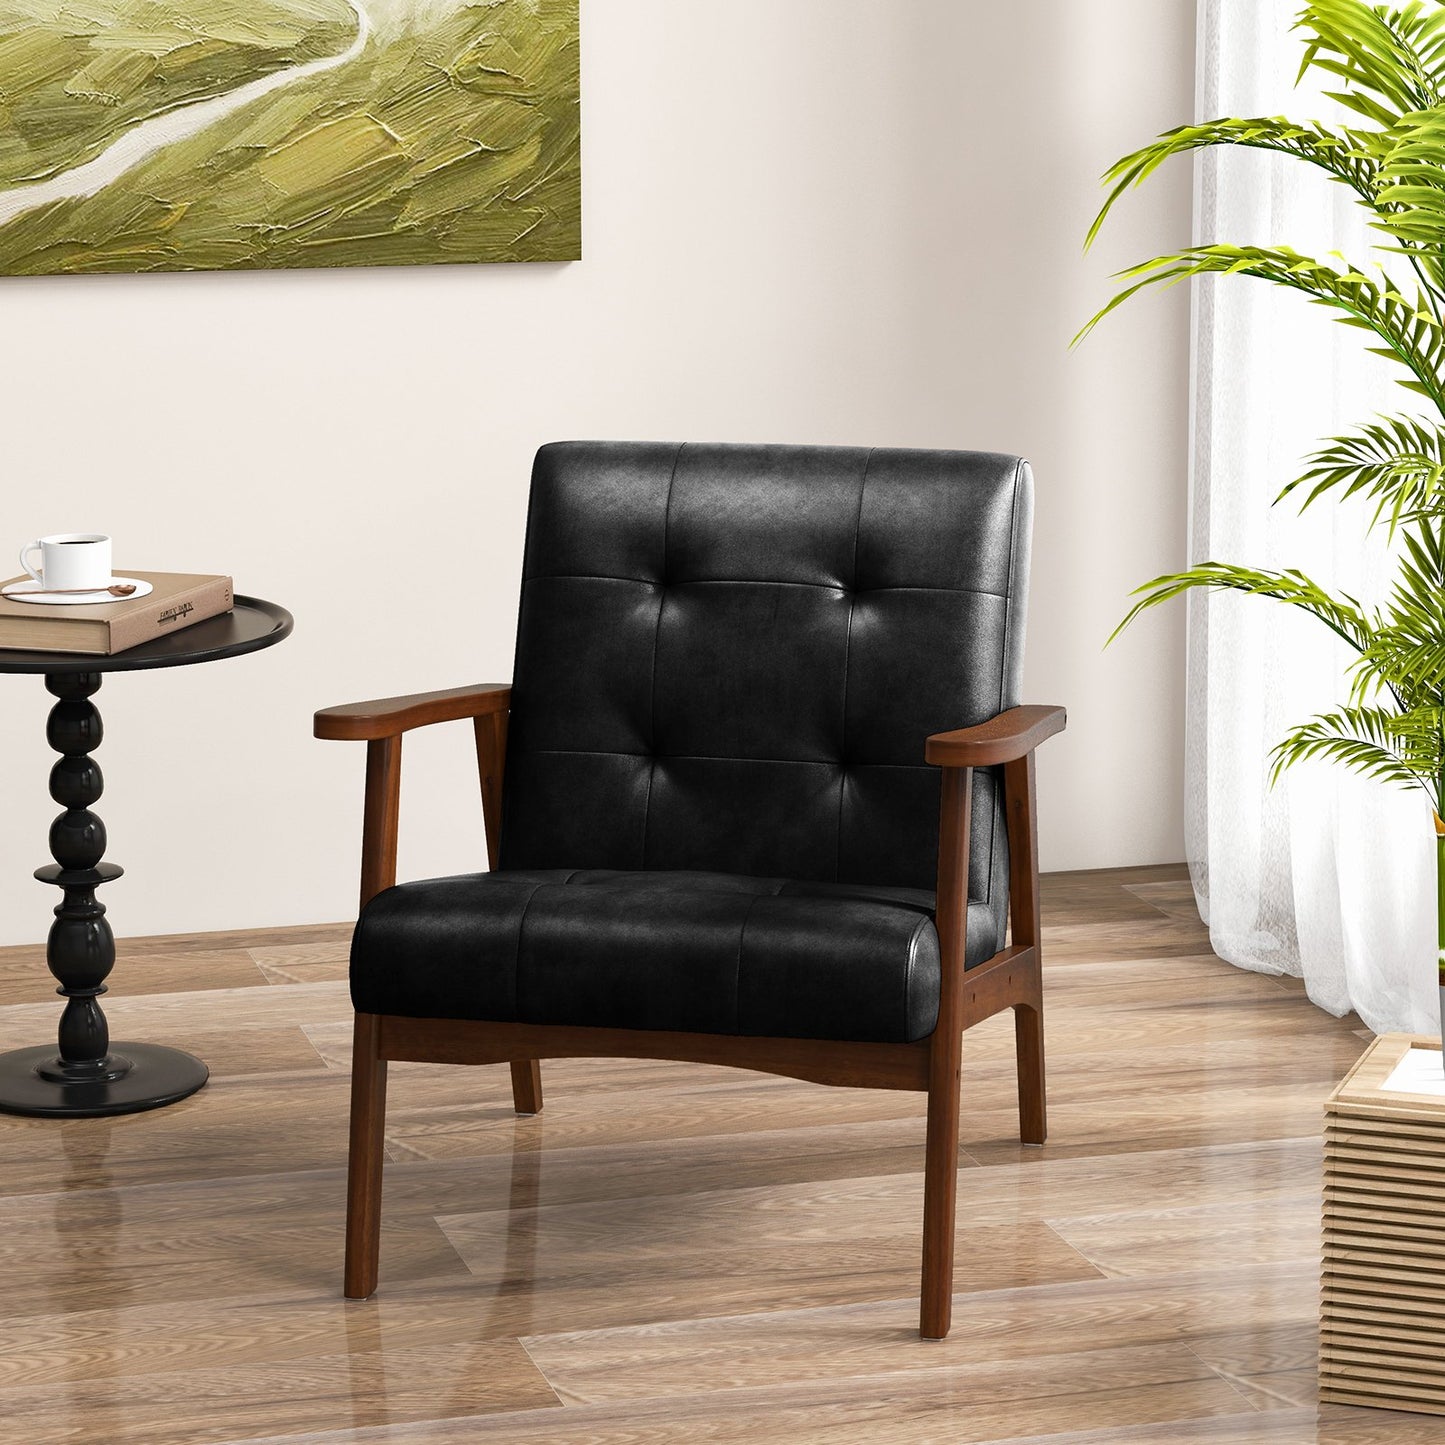 Mid Century Modern Accent Chair with Solid Rubber Wood Frame and Leather Cover, Black